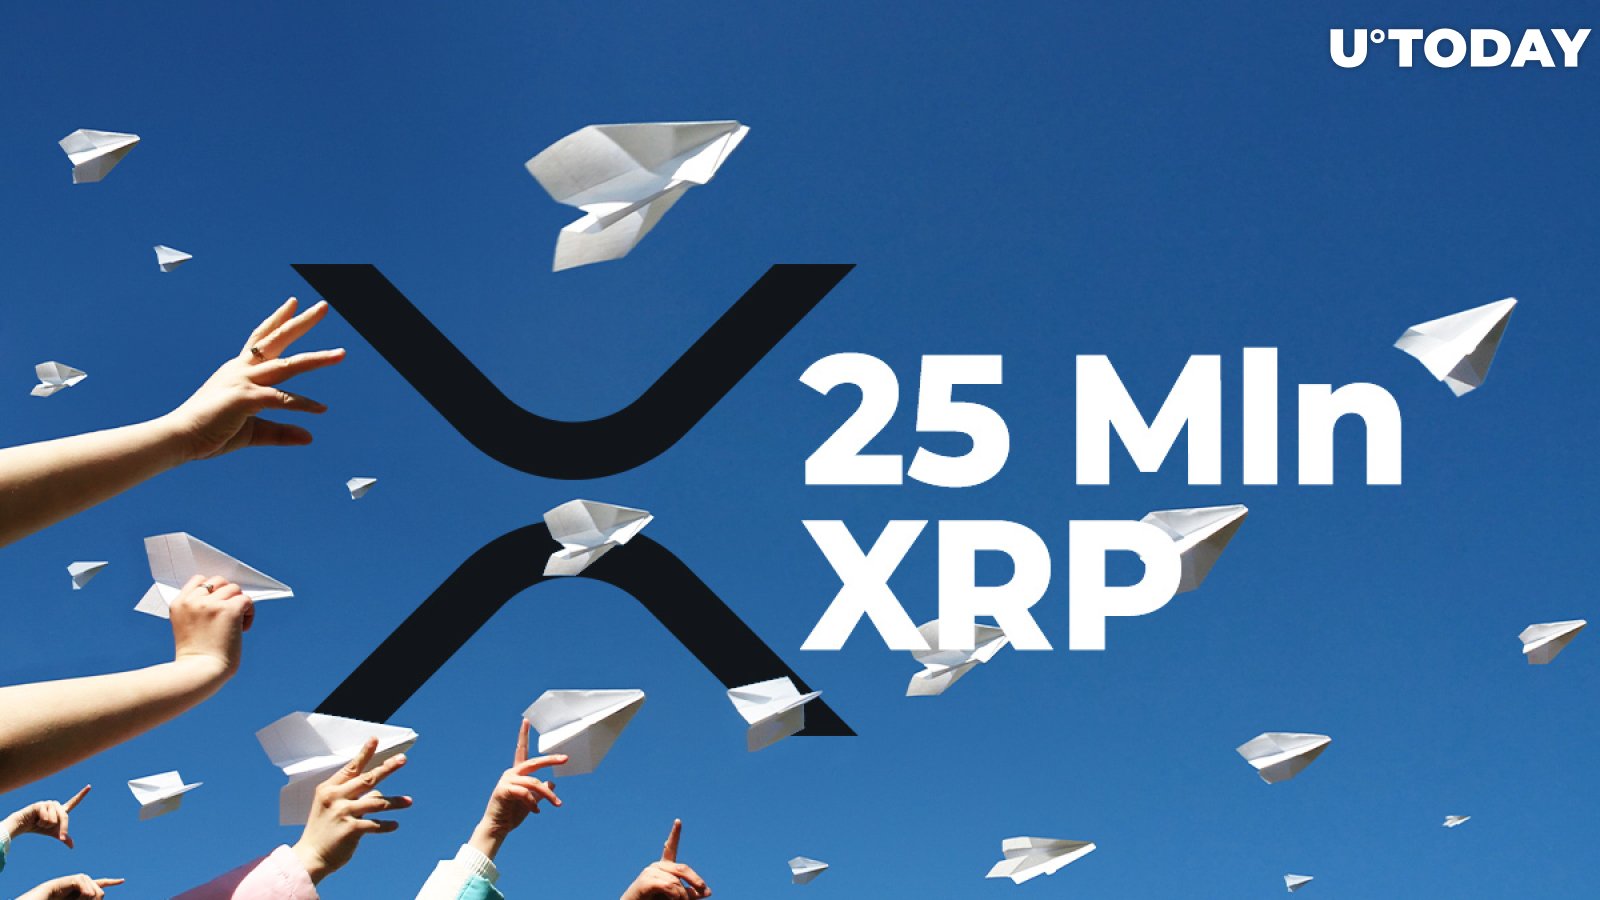 Ripple Wires 20 Mln XRP While Jed McCaleb Gets Rid of 5 Mln XRP